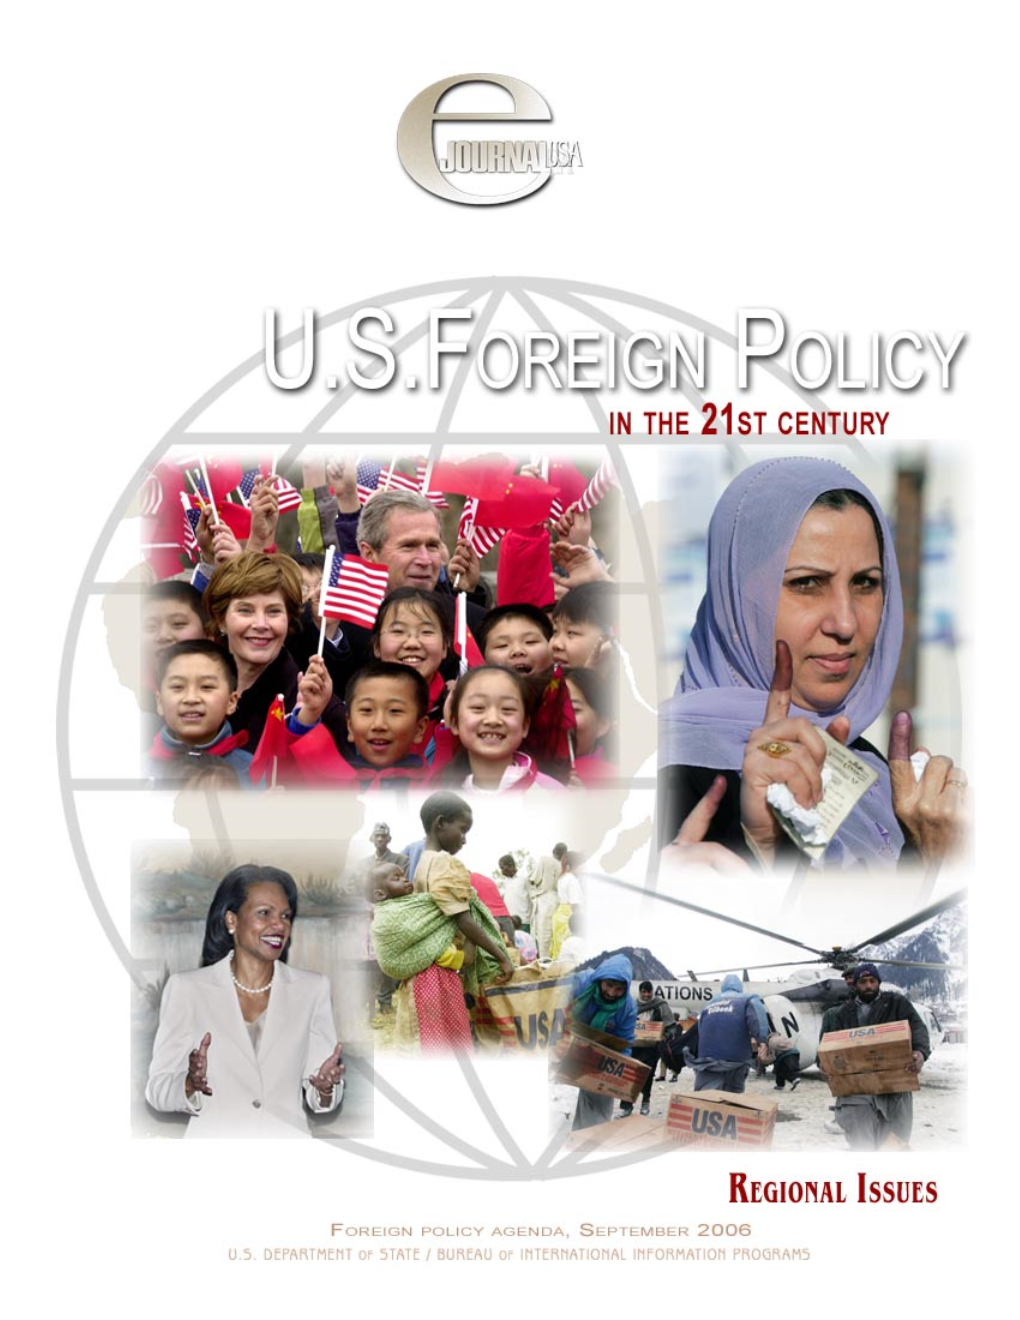 U.S. Foreign Policy in the 21St Century